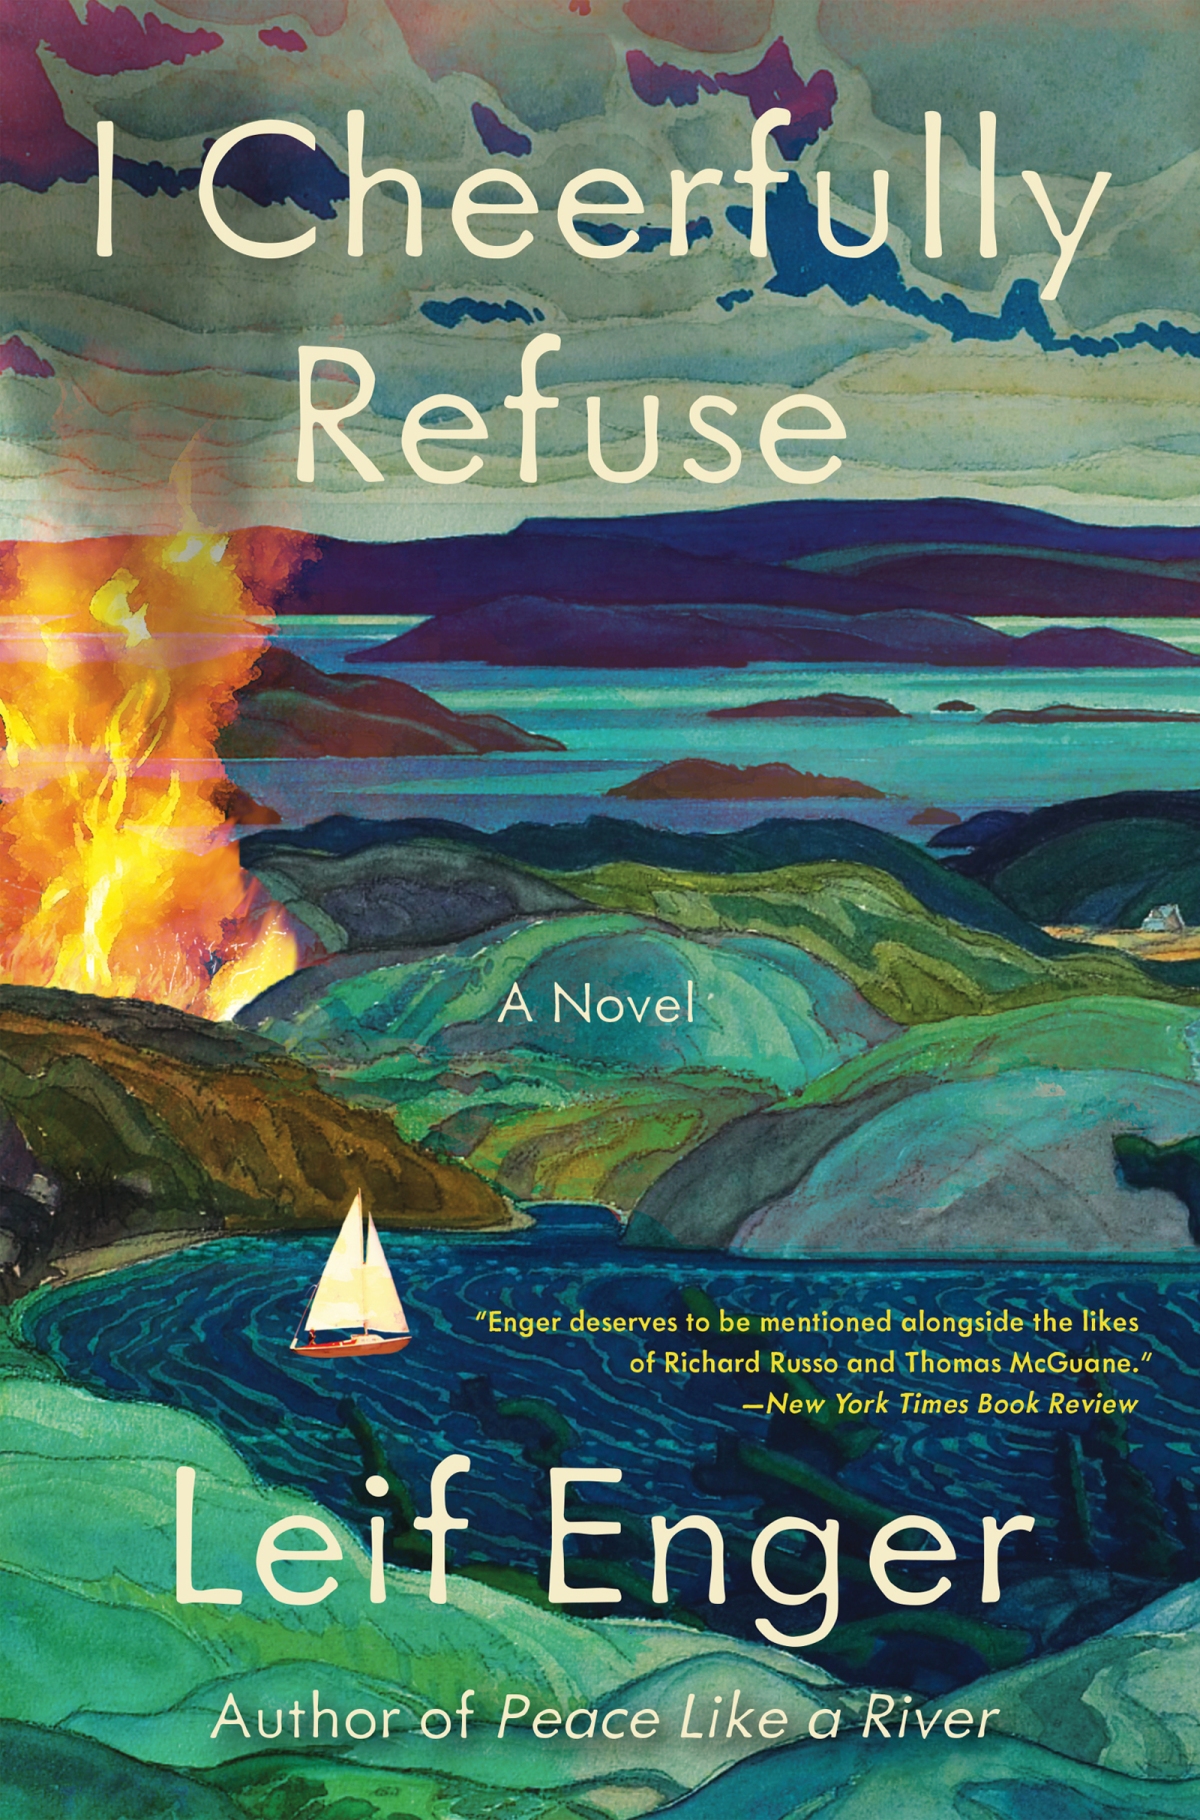 I Cheerfully Refuse: Author Discussion & Book Signing